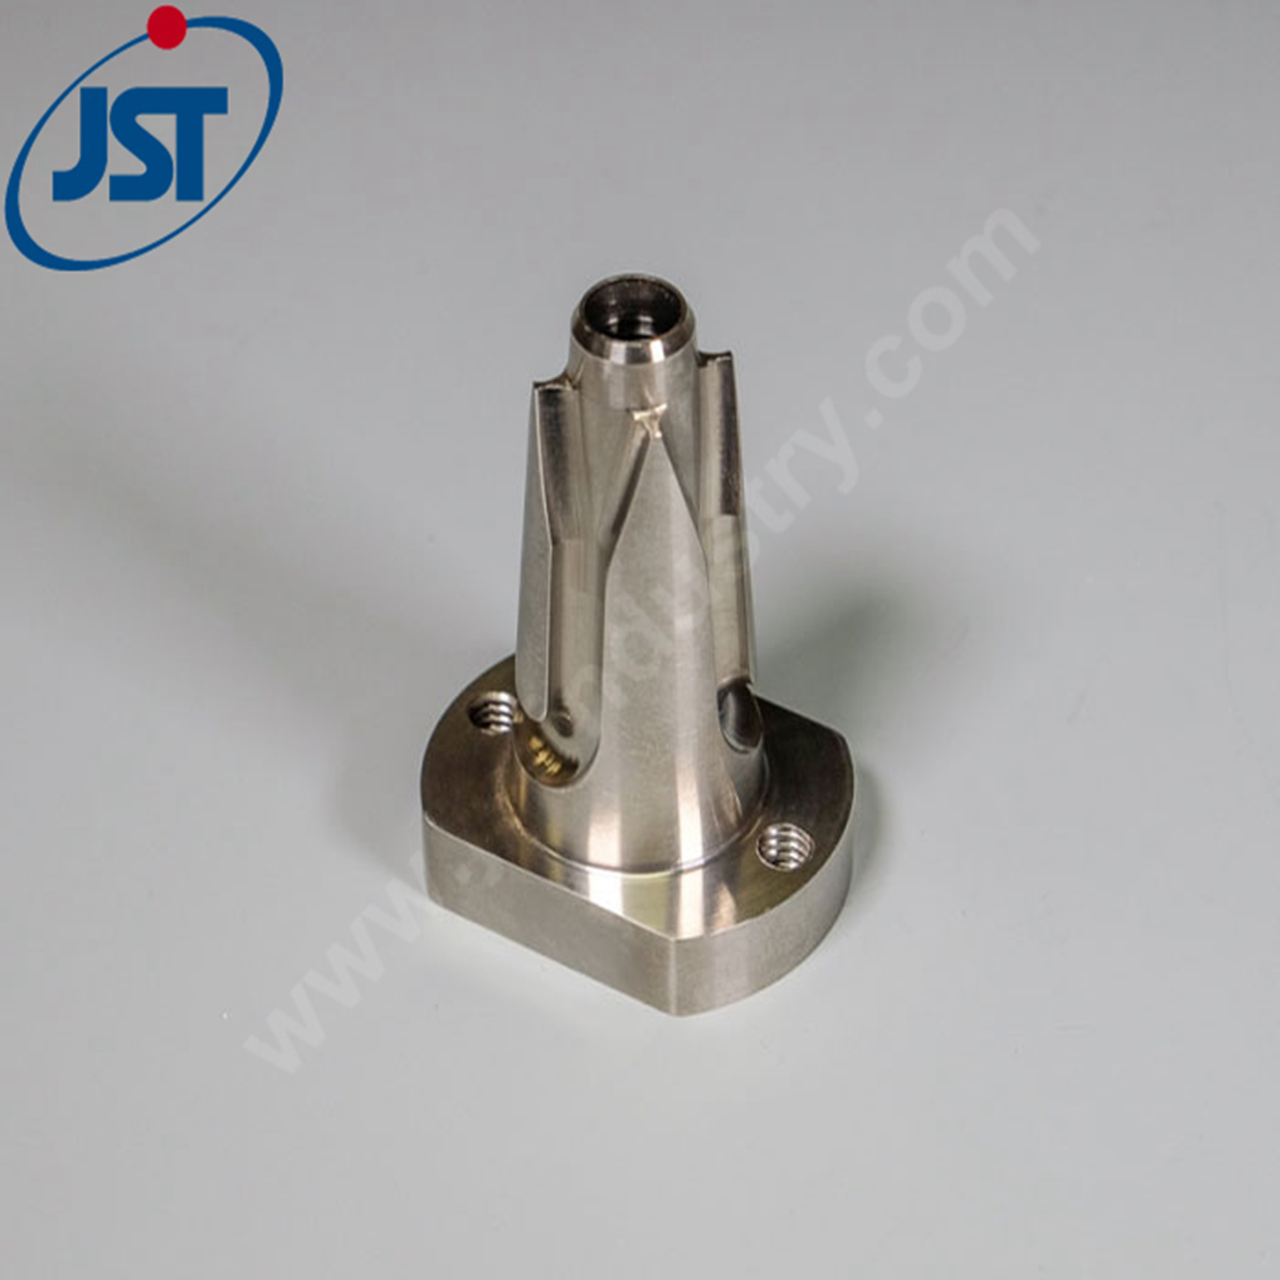 Precision Excellence in Medical CNC Machined Parts: Your Trusted OEM Partner